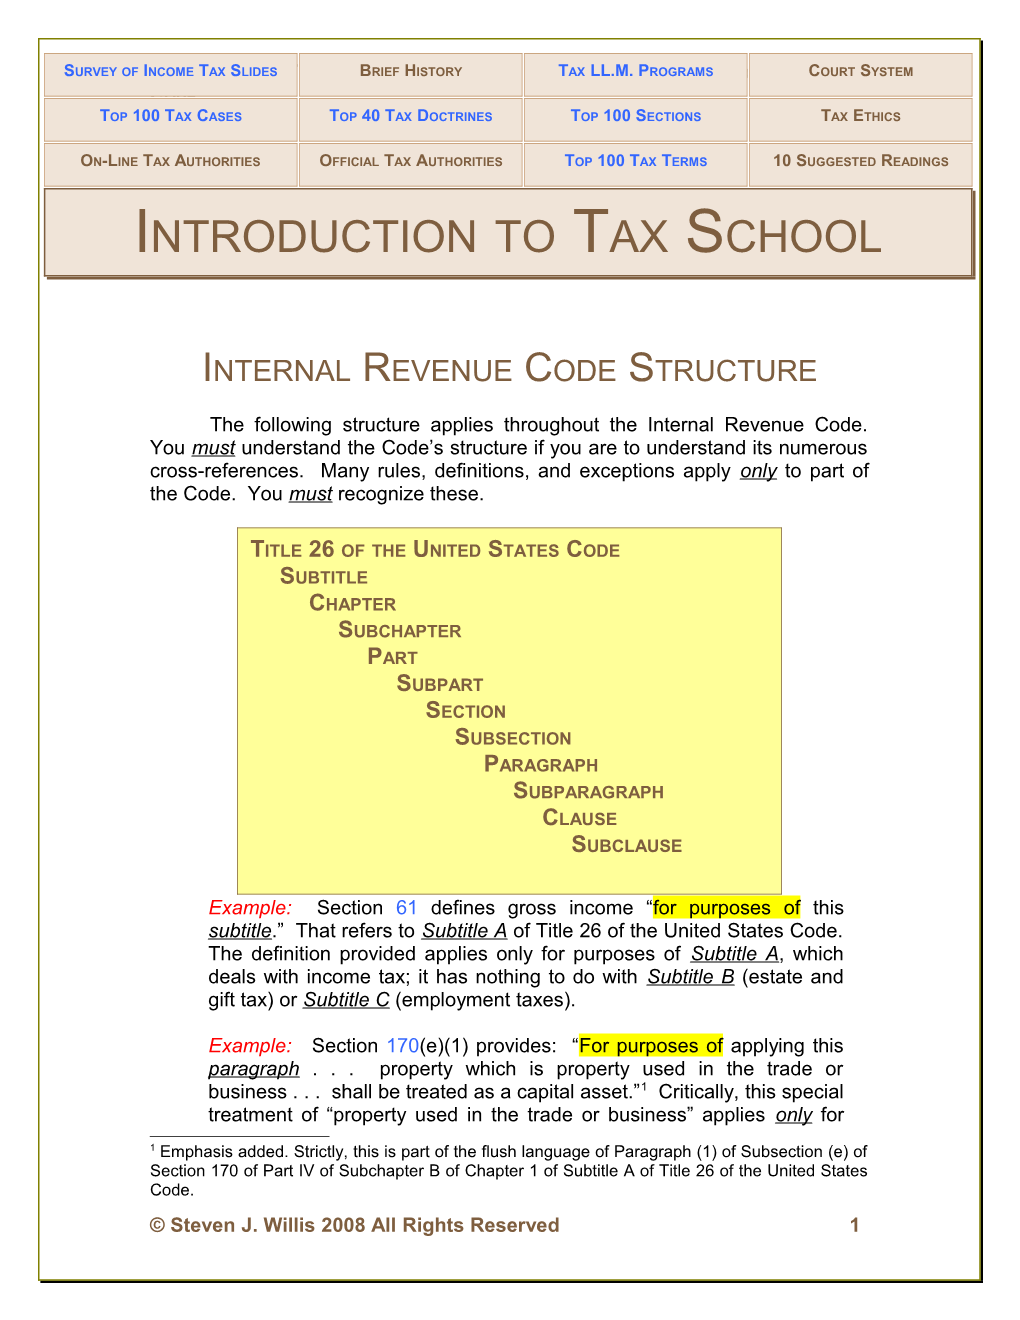 Introduction to Tax School Structure of the Code